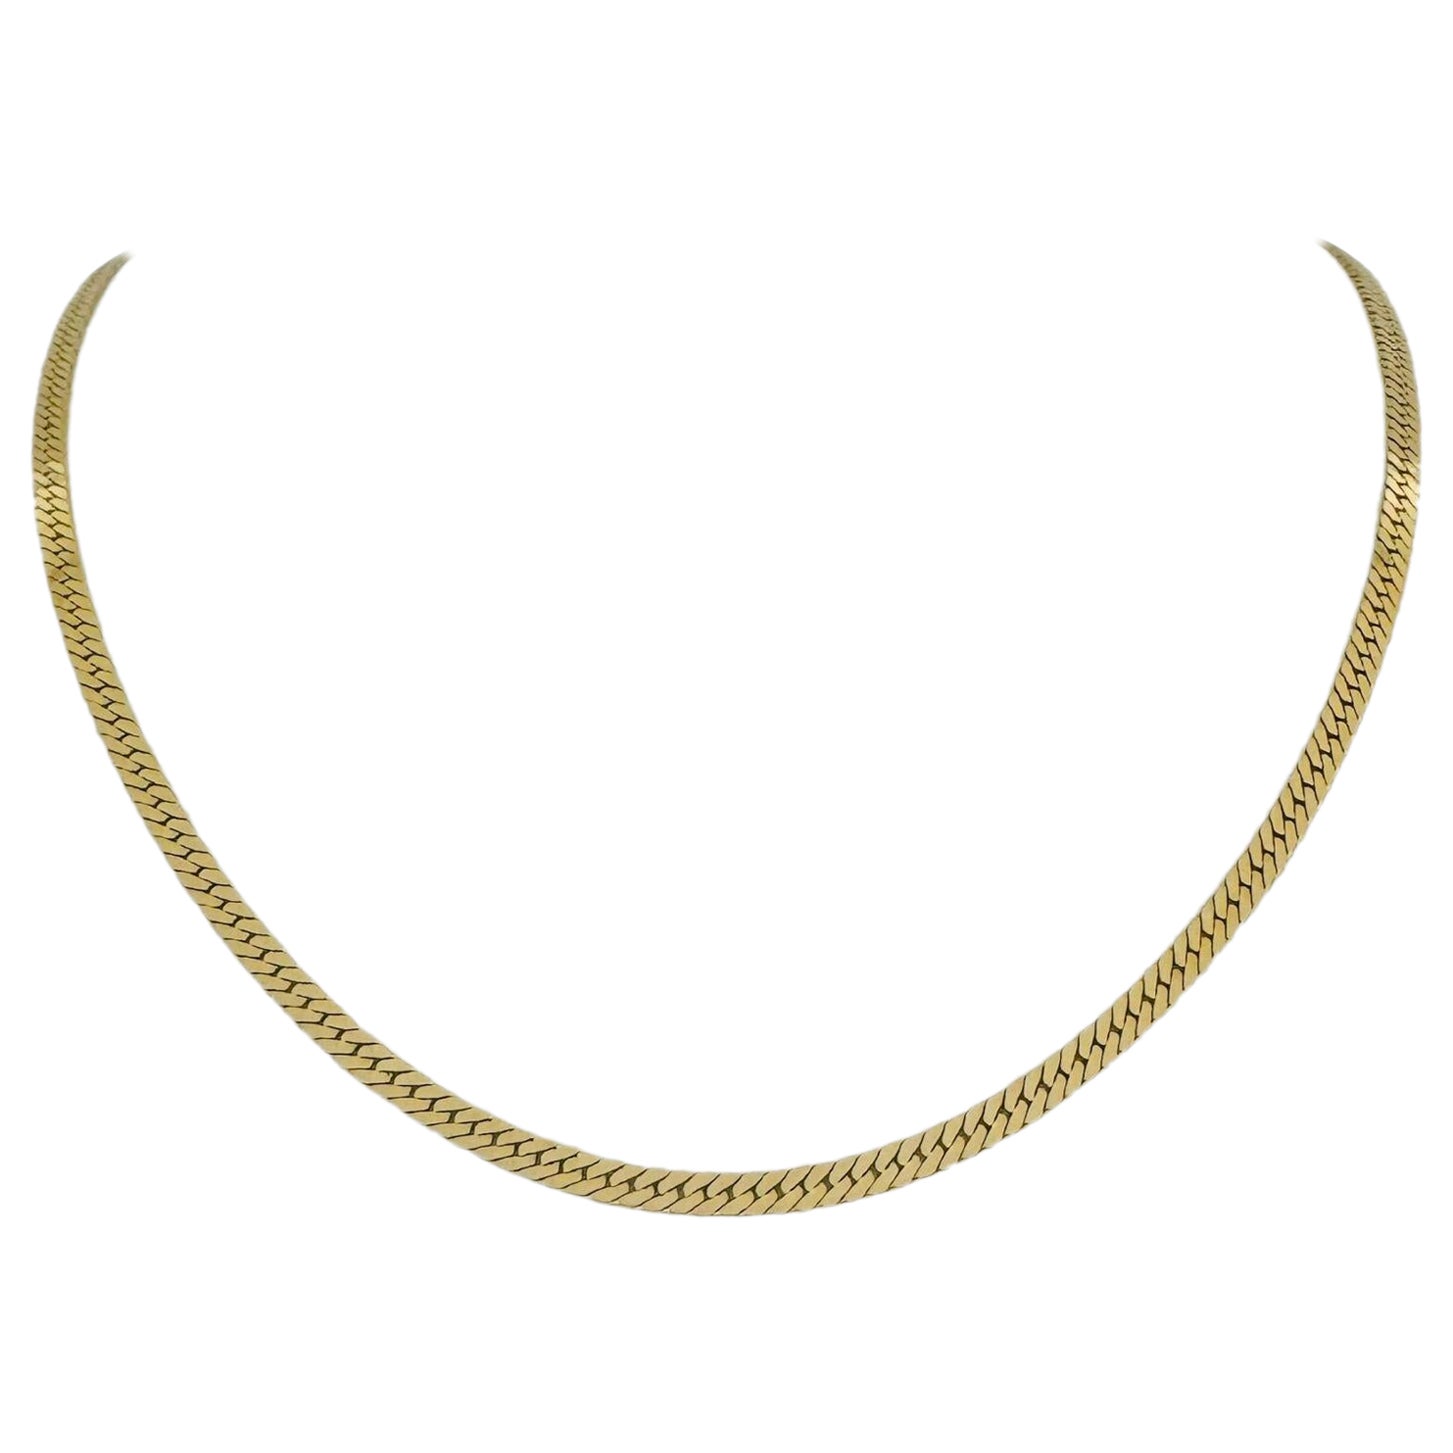 14 Karat Yellow Gold Solid Thick Herringbone Link Chain Necklace 